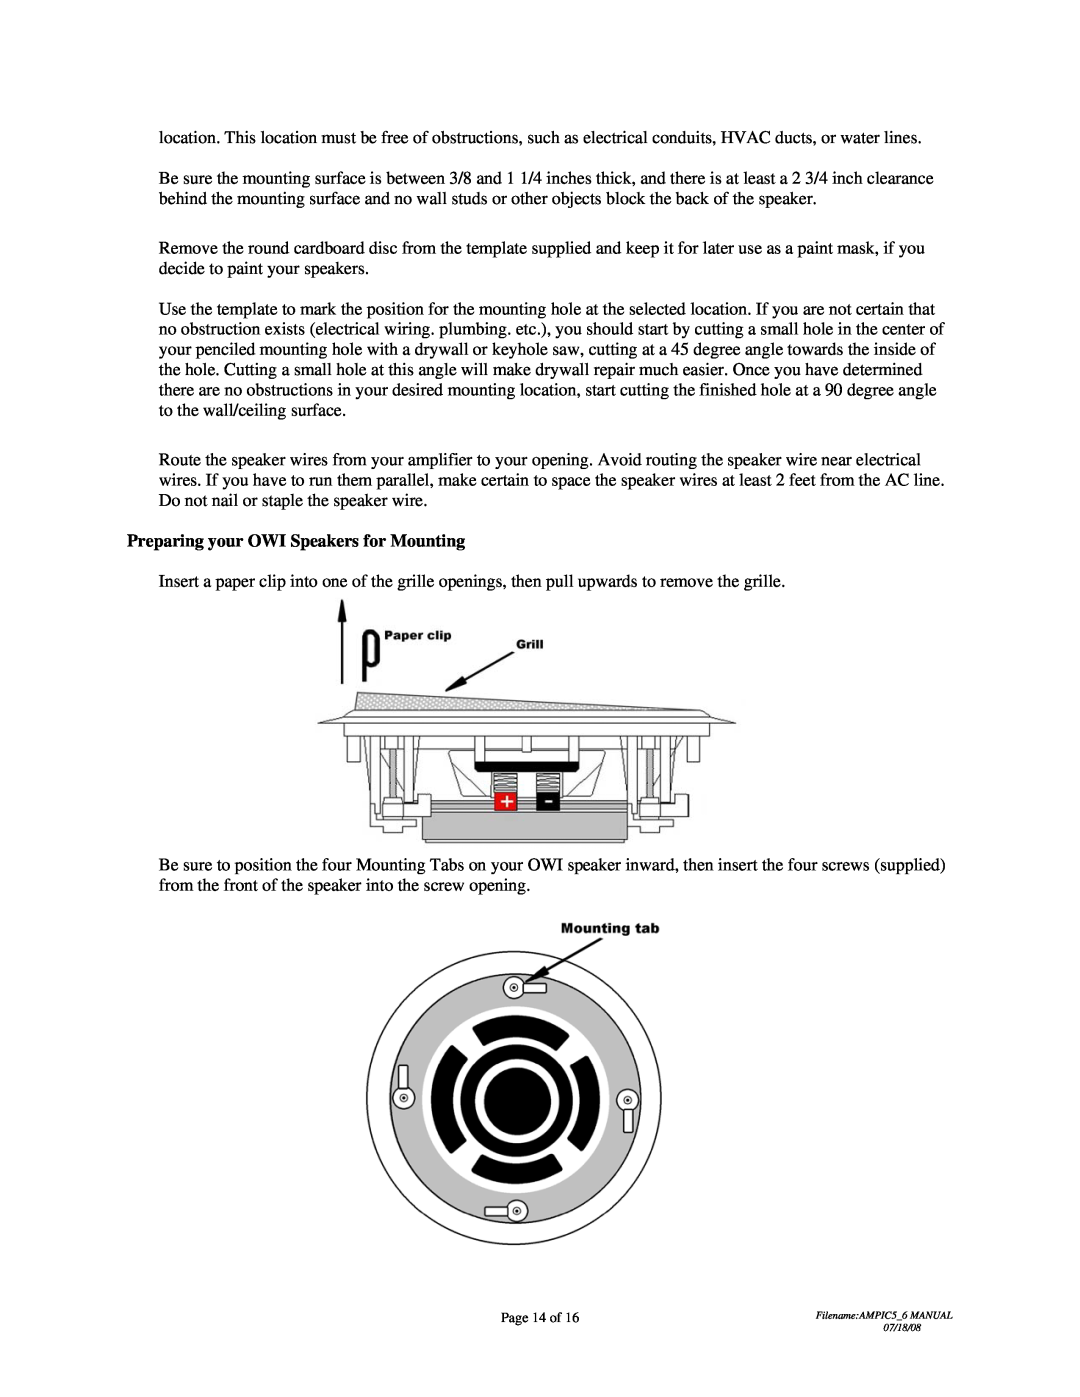 OWI AMP-IC5, AMP-IC6 installation instructions Preparing your OWI Speakers for Mounting, Page 14 of 